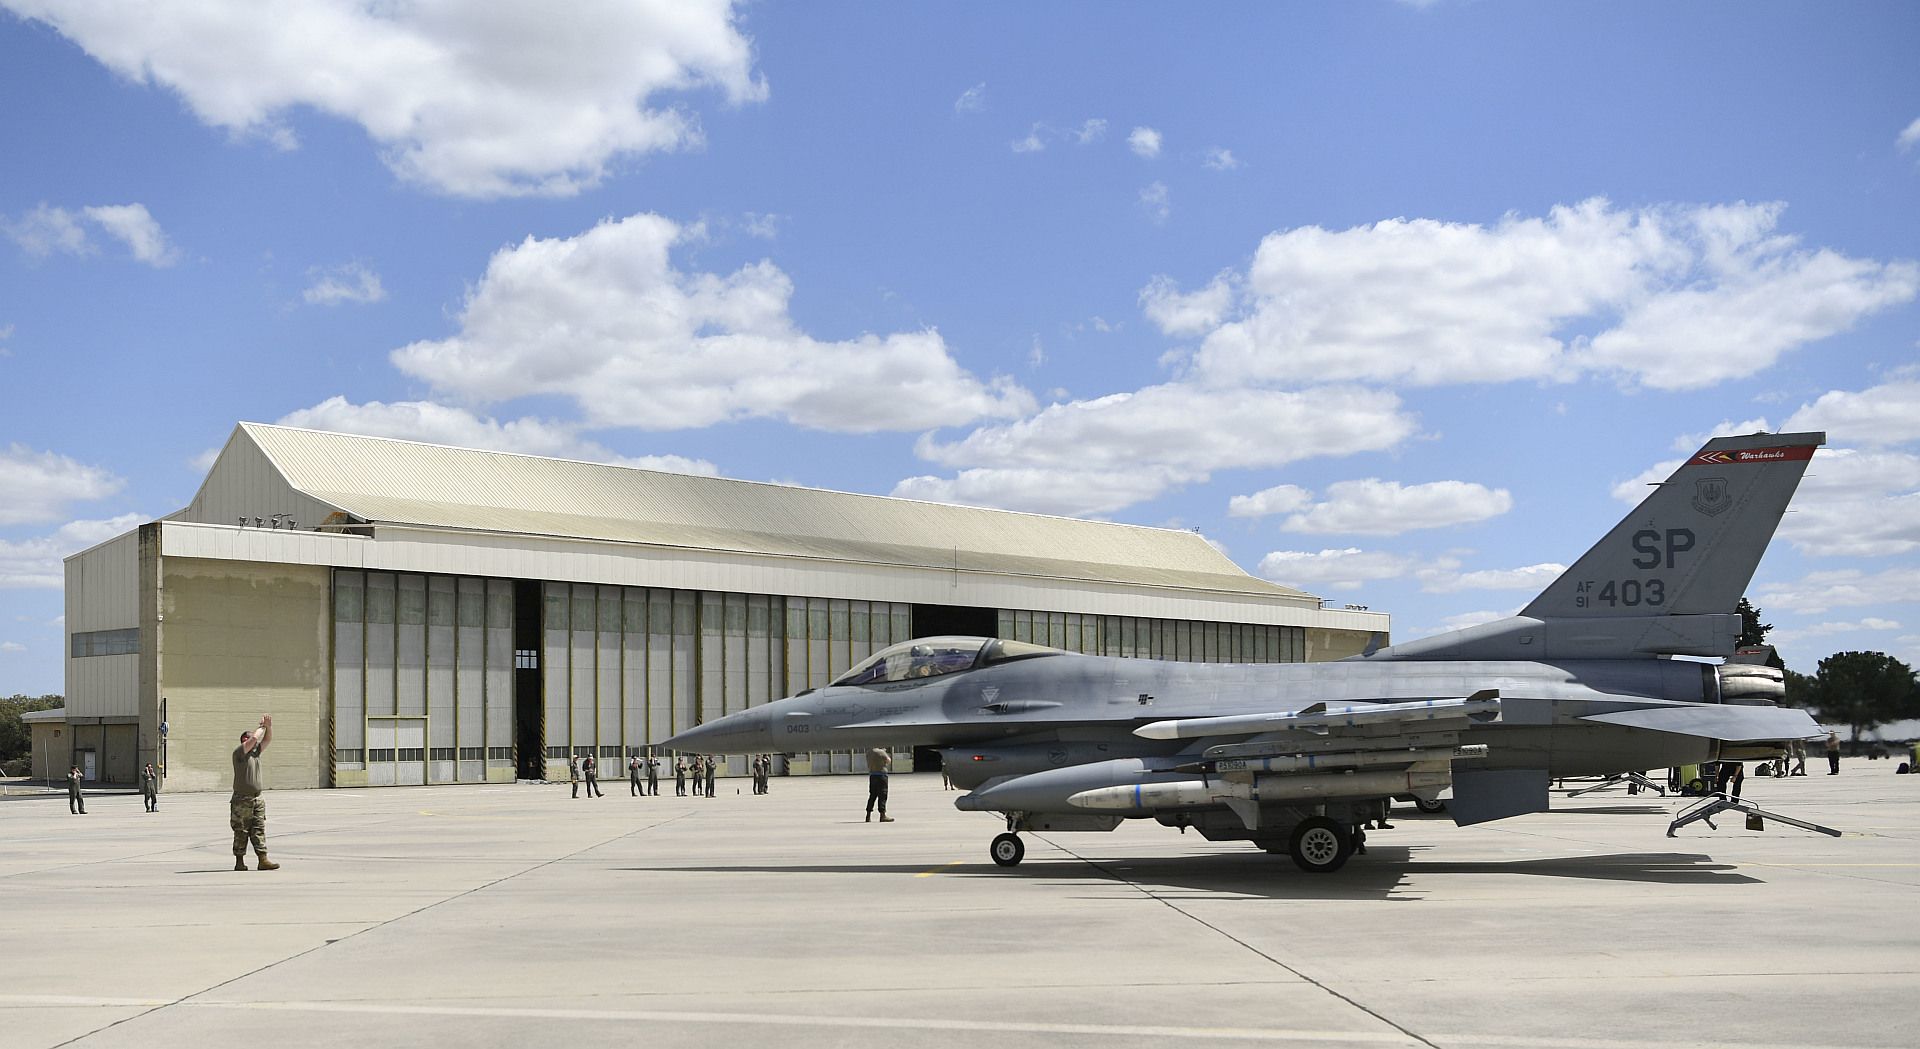 16 Fighting Falcon Aircraft From The 480th Fighter Squadron From Spangdahlem Air Base Germany Arrives In Portugal For Exercise Real Thaw 22 At Beja Air Base Portugal June 24 2022